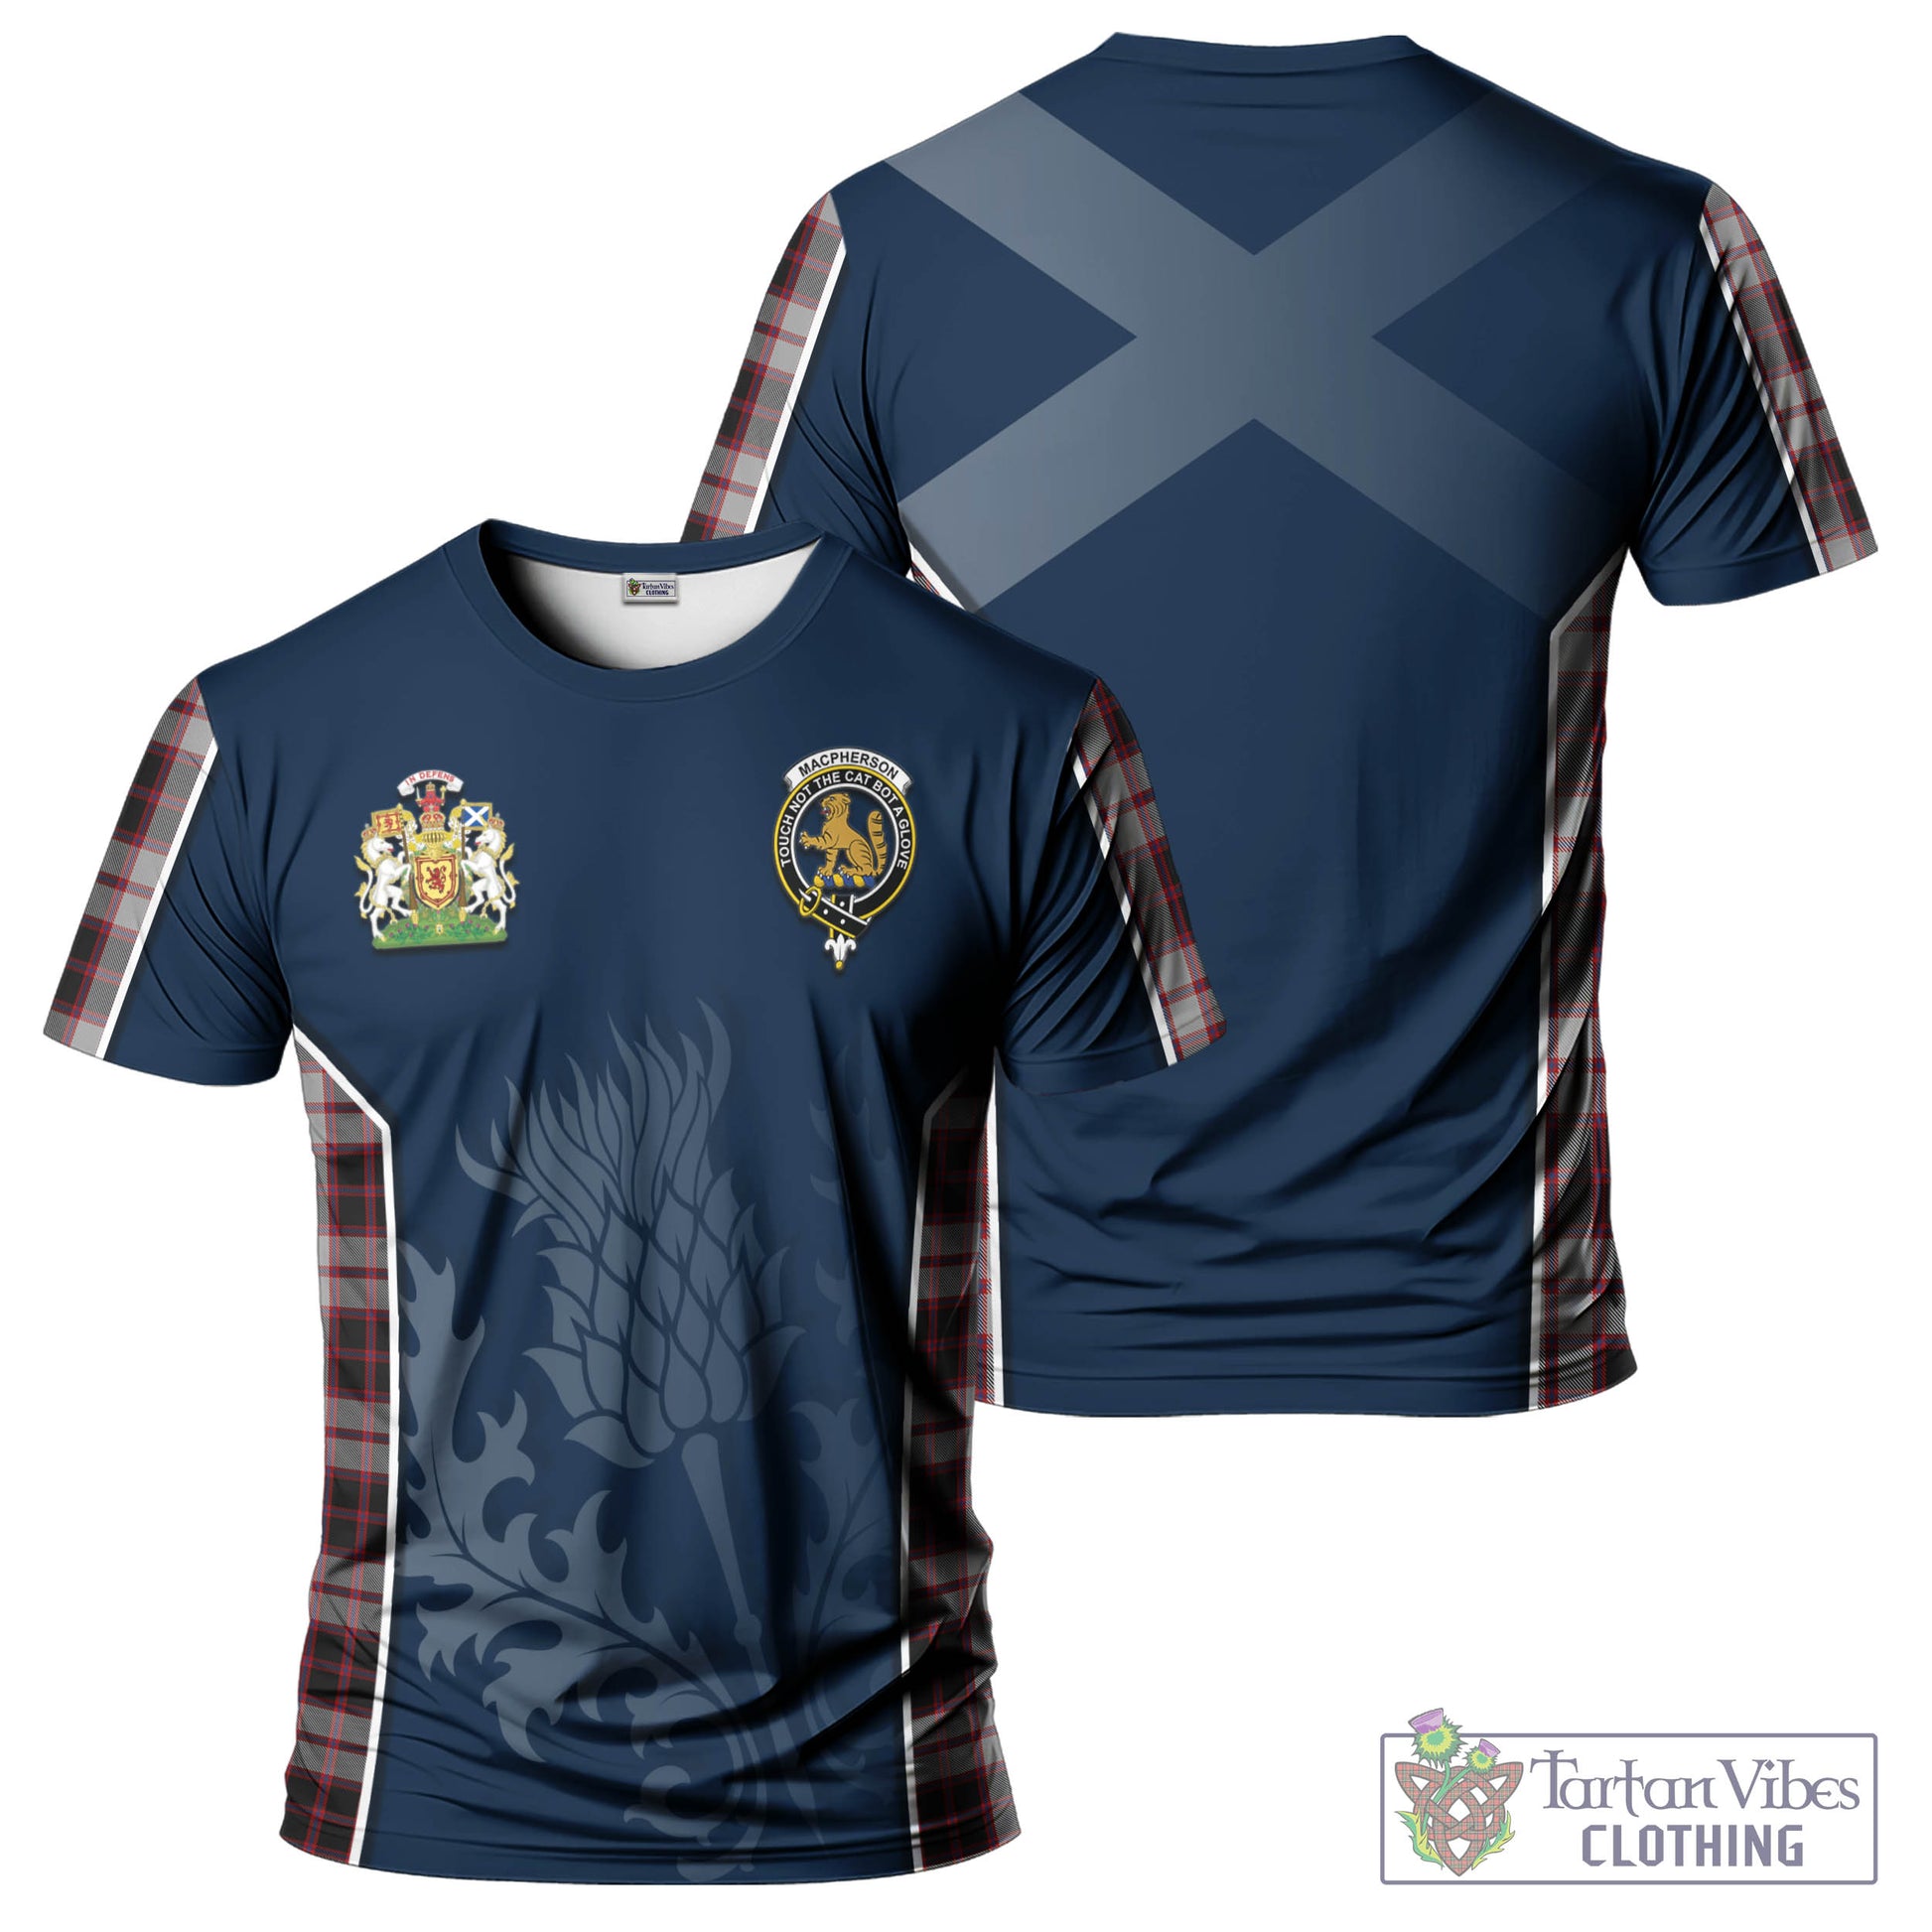 Tartan Vibes Clothing MacPherson Tartan T-Shirt with Family Crest and Scottish Thistle Vibes Sport Style